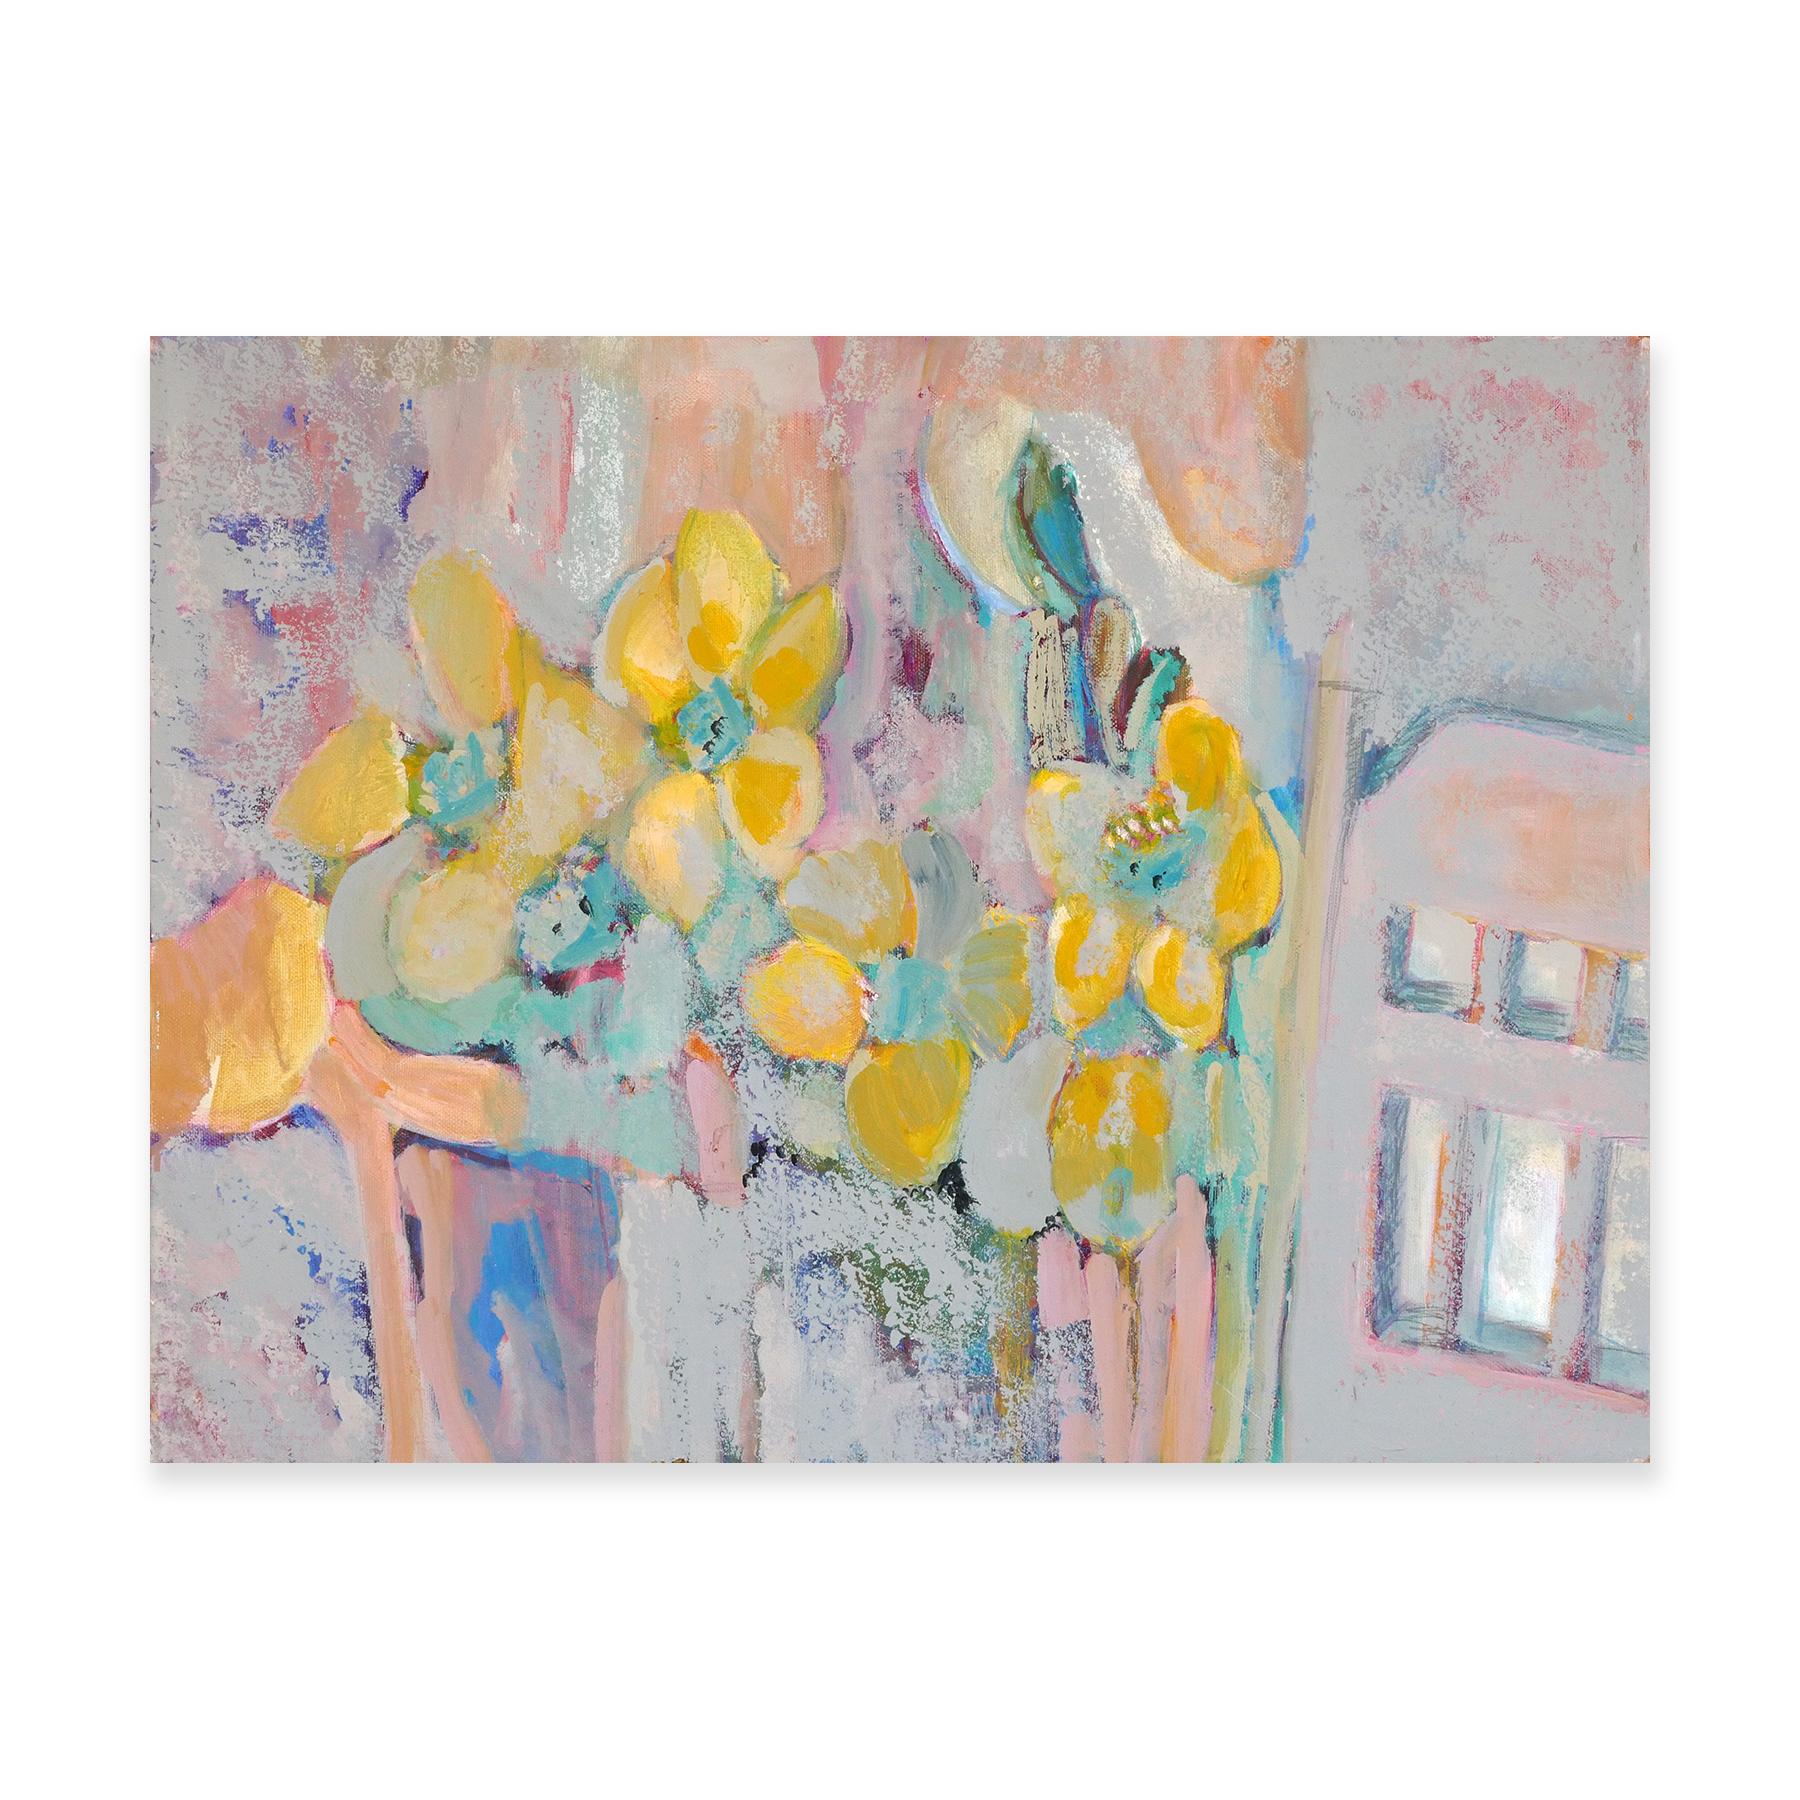 Pastel pink, purple, and blue abstract interior still life with yellow flowers by Houston, TX artist Margaret Nobler. The painting depicts yellow flowers in a vase against a pastel pink abstract background and a chair's backrest. Unsigned. Unframed